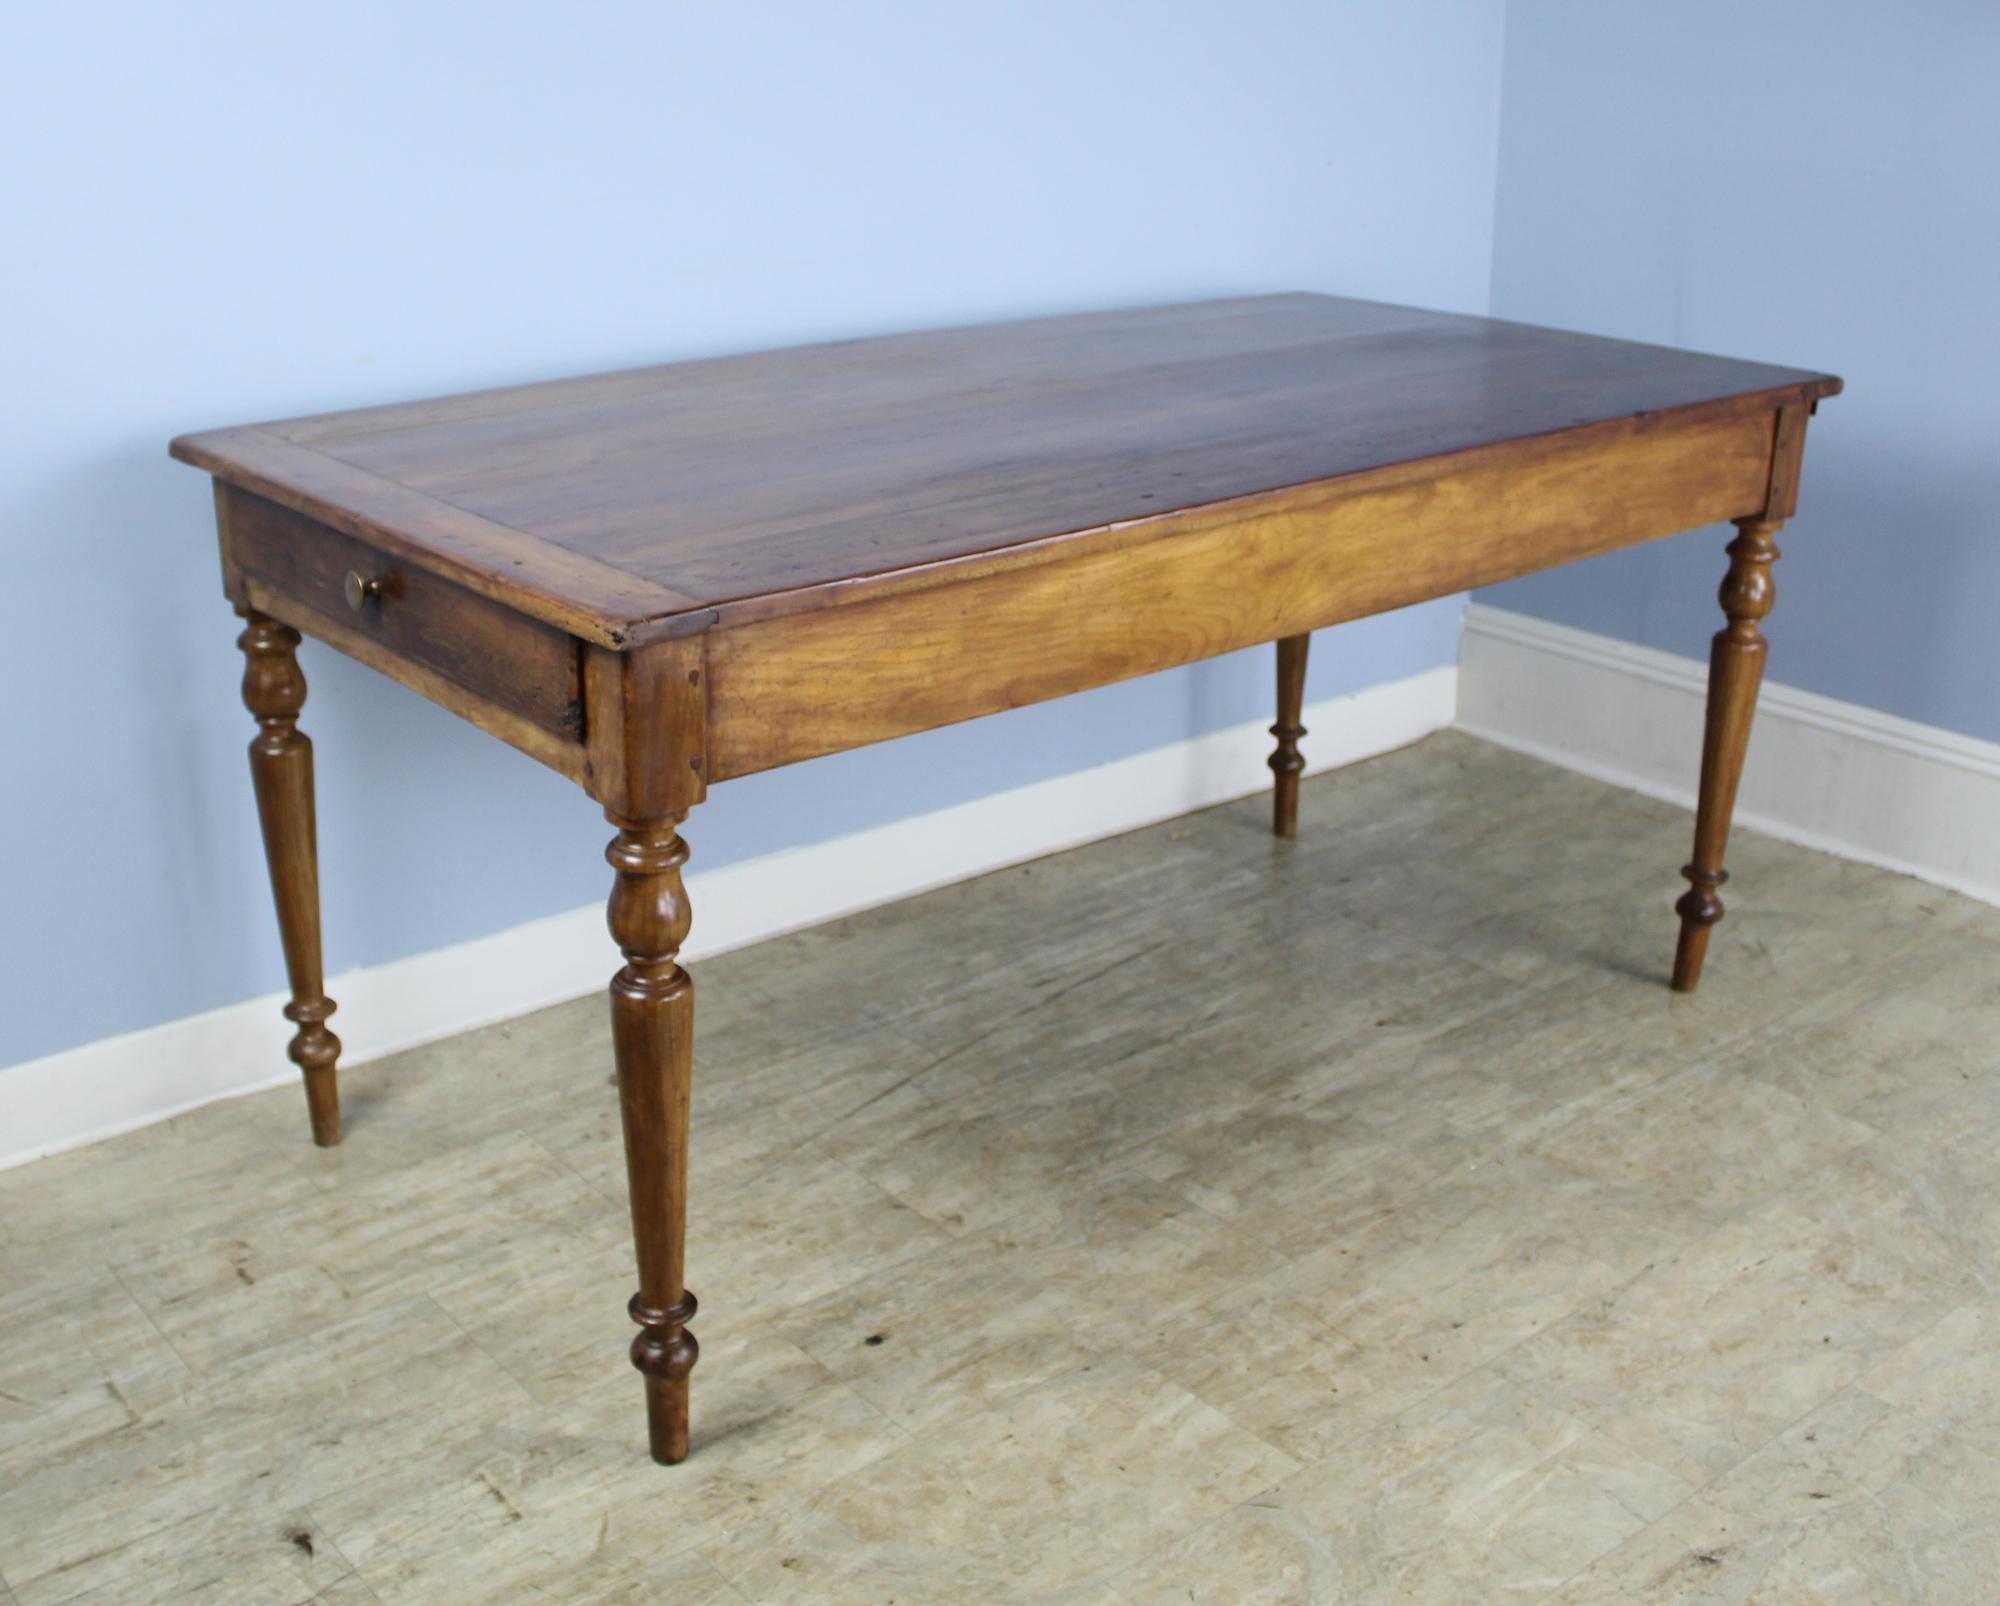 A smaller elm farm table with glossy turned legs and a gently refinished top with breadboard ends. Single roomy drawer at one end and bread slide at the other. Bread slide is in good condition and sturdy enough for additional diners or serving